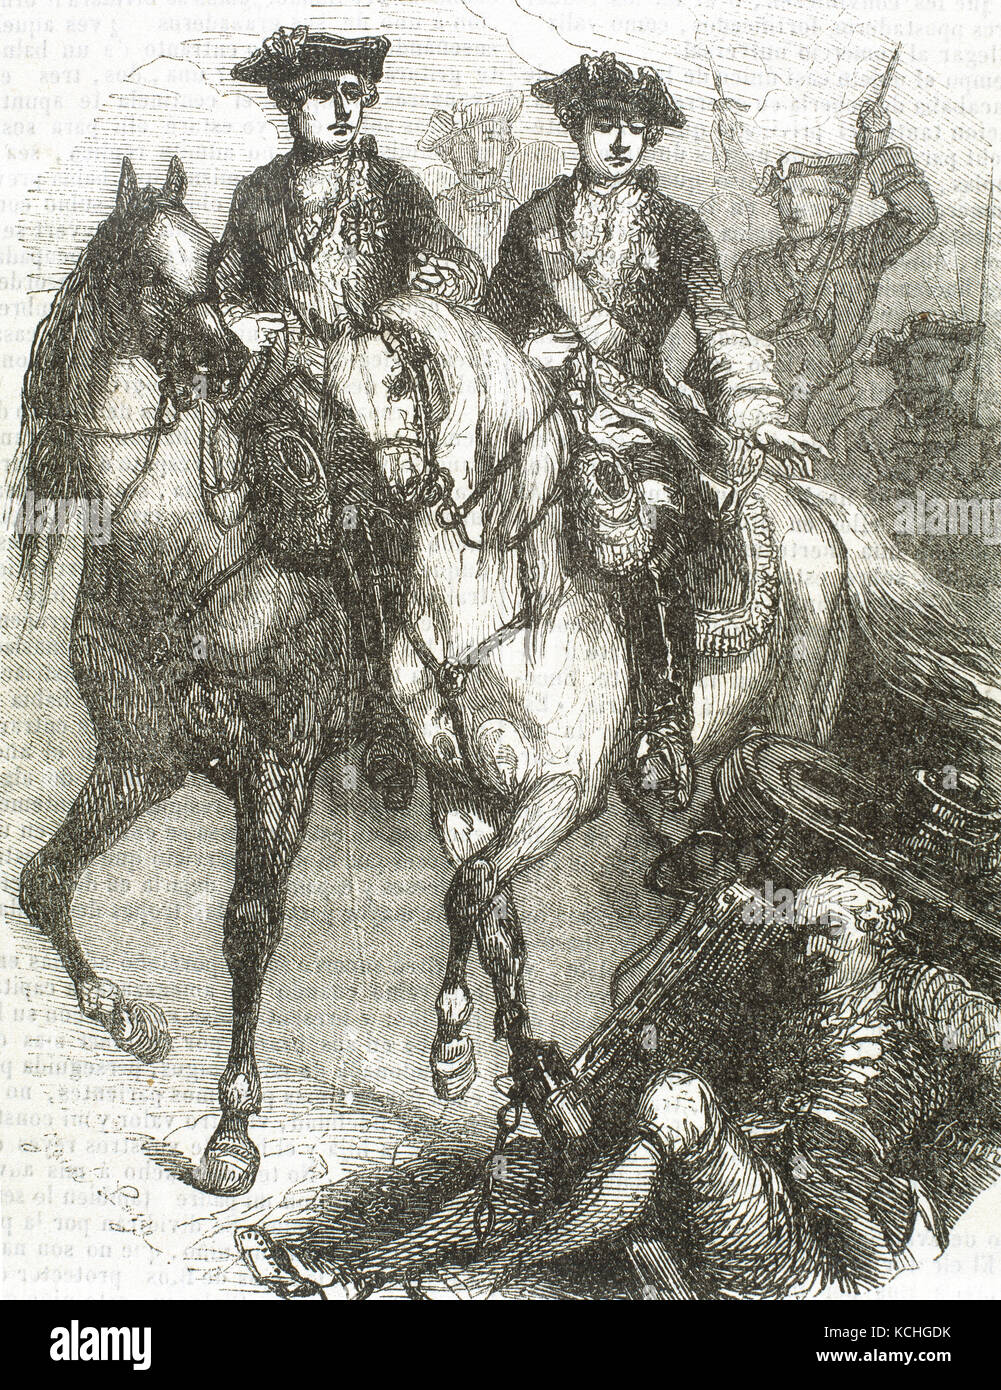 War of the Austrian Succession (1740-1748). Louis XV (1710-1774), king of France and his son Louis, Dauphin of France (1729-1765) present at the Battle of Fontenoy, 11 May 1745. Engraving, 1851. Stock Photo